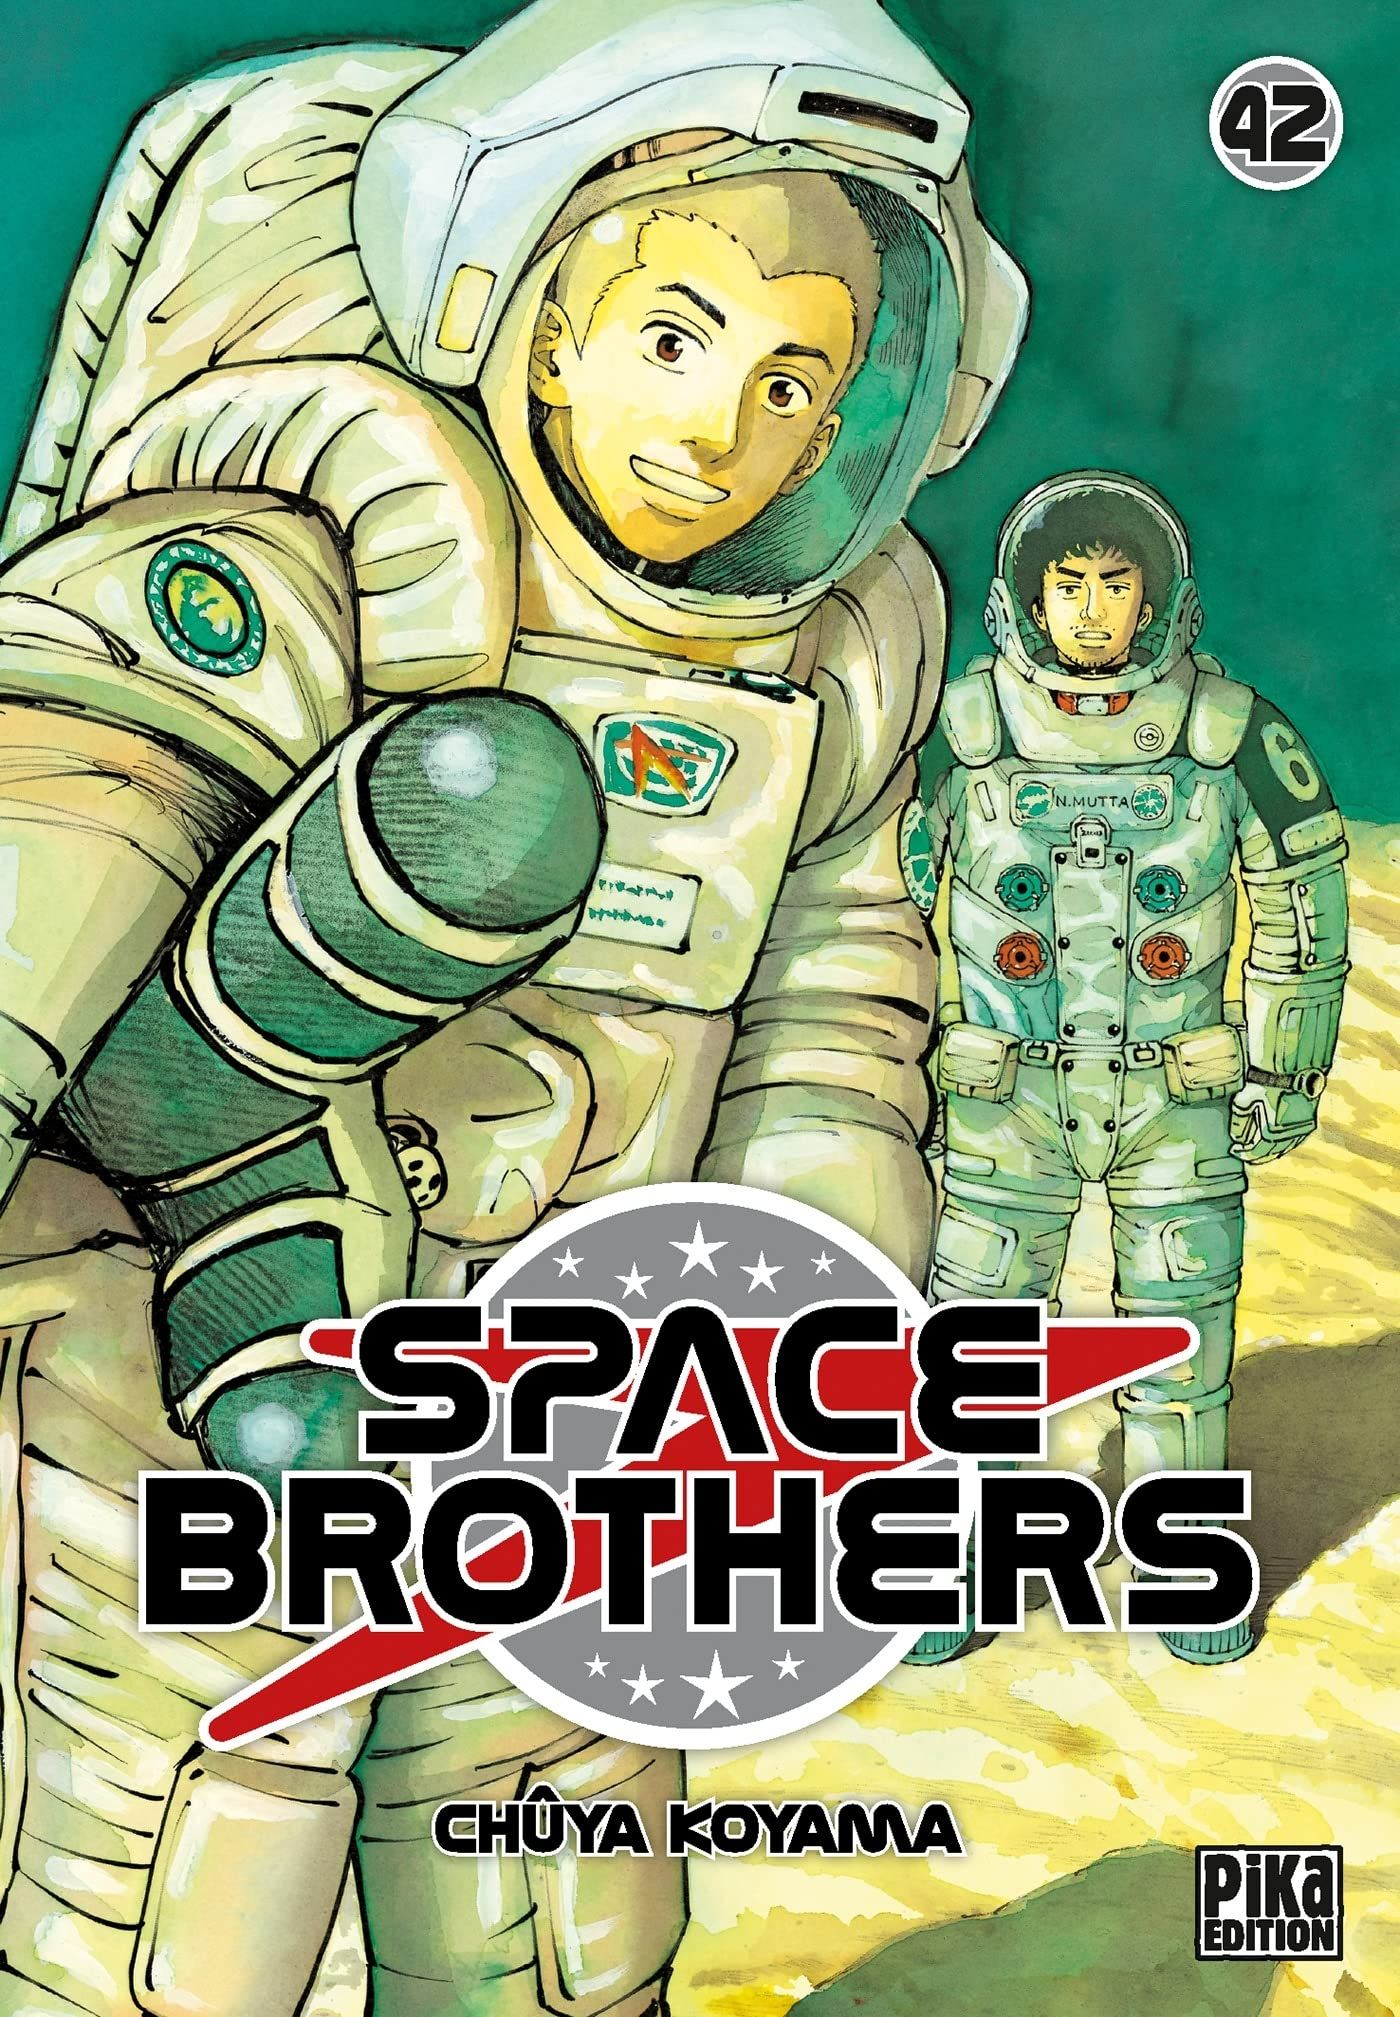 Space Brothers Vol.42